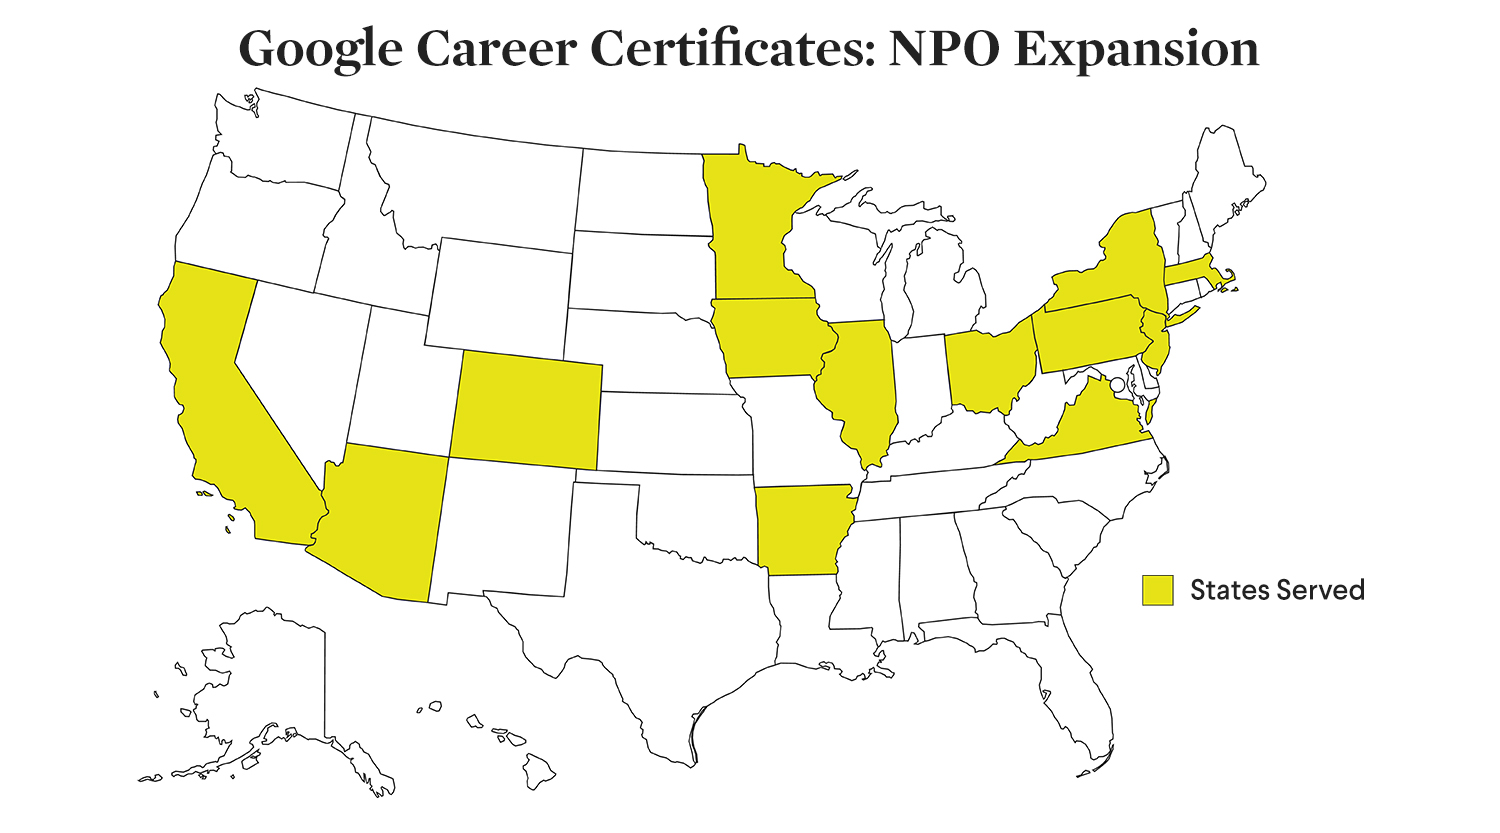 4 Google Career Certificates NPO Expansion